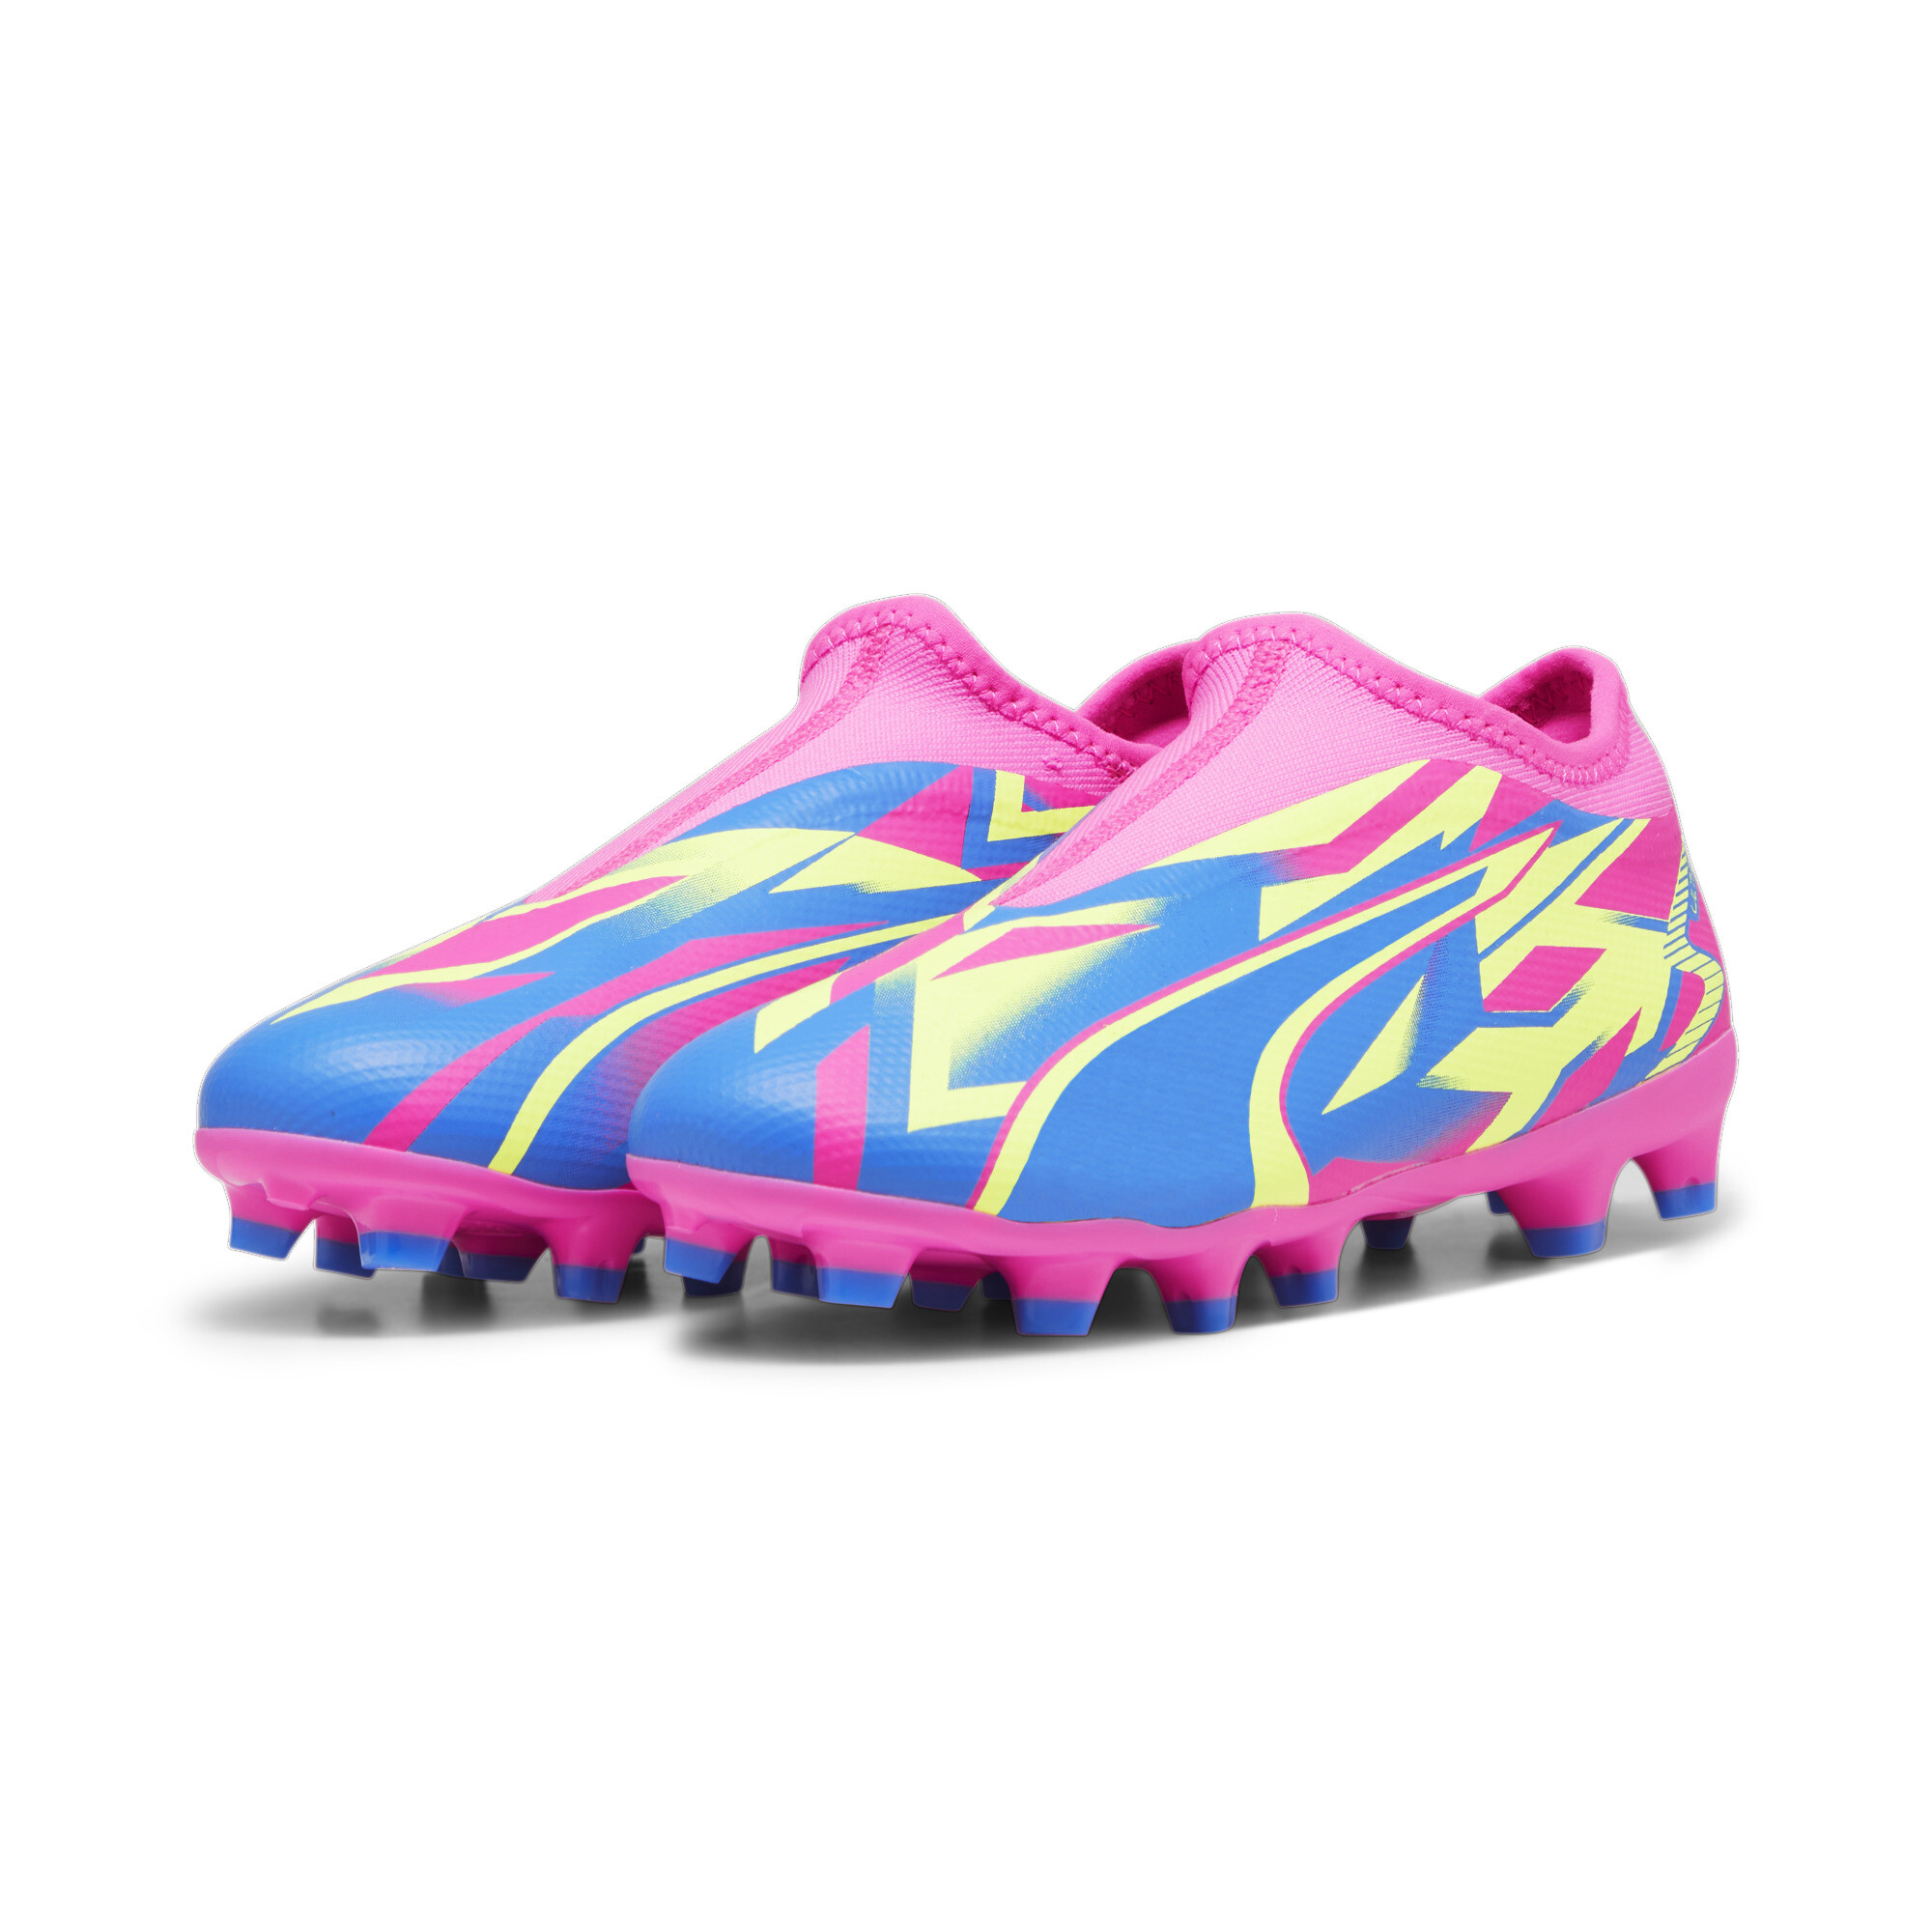 Puma ULTRA MATCH LL ENERGY FG/AG Youth Football Boots, Pink, Size 31, Shoes